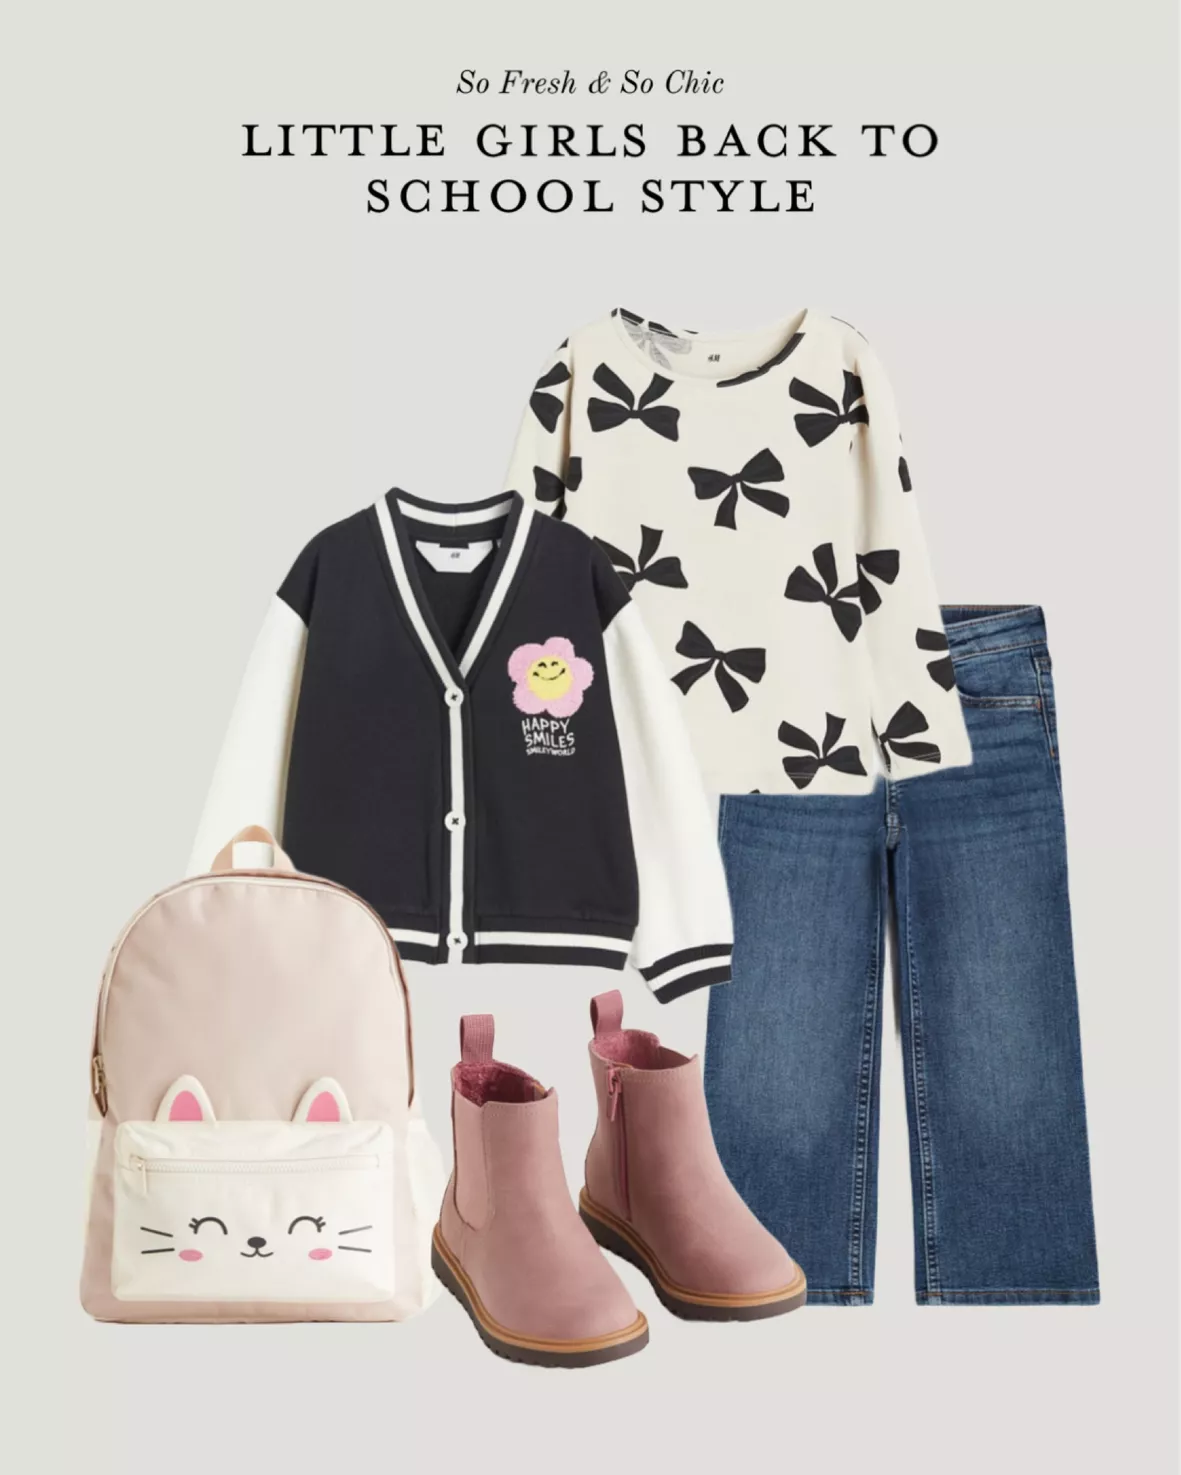 Tween Boys Pink: Clothing, Accessories, & Shoes